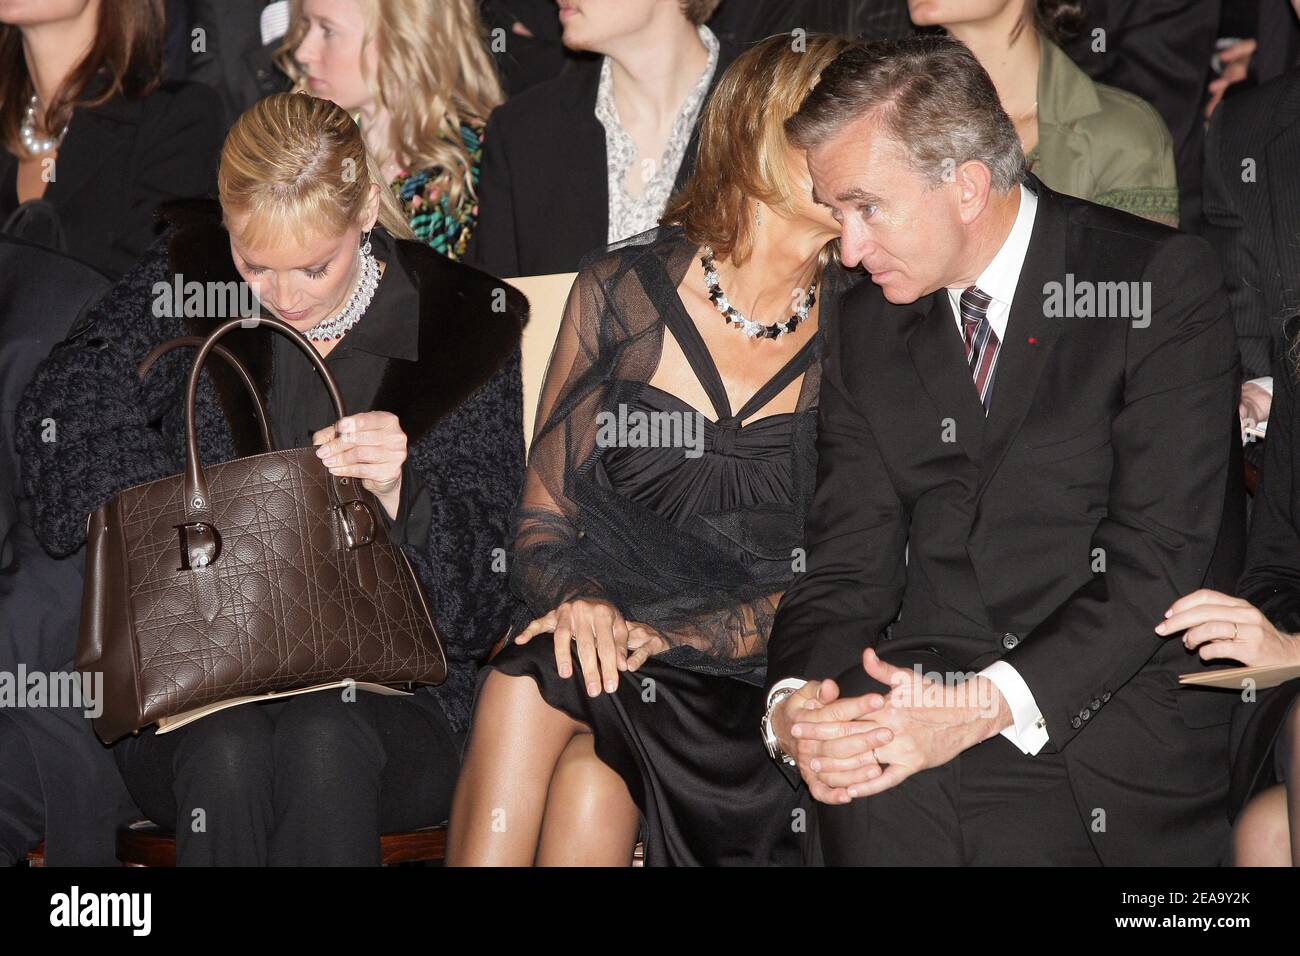 U.S. actress Sharon Stone poses surrounded by LVMH CEO Bernard Arnault (L)  and French Minister of Culture Renaud Donnedieu de Vabres upon arrival to  the cocktail reception for the inauguration of the